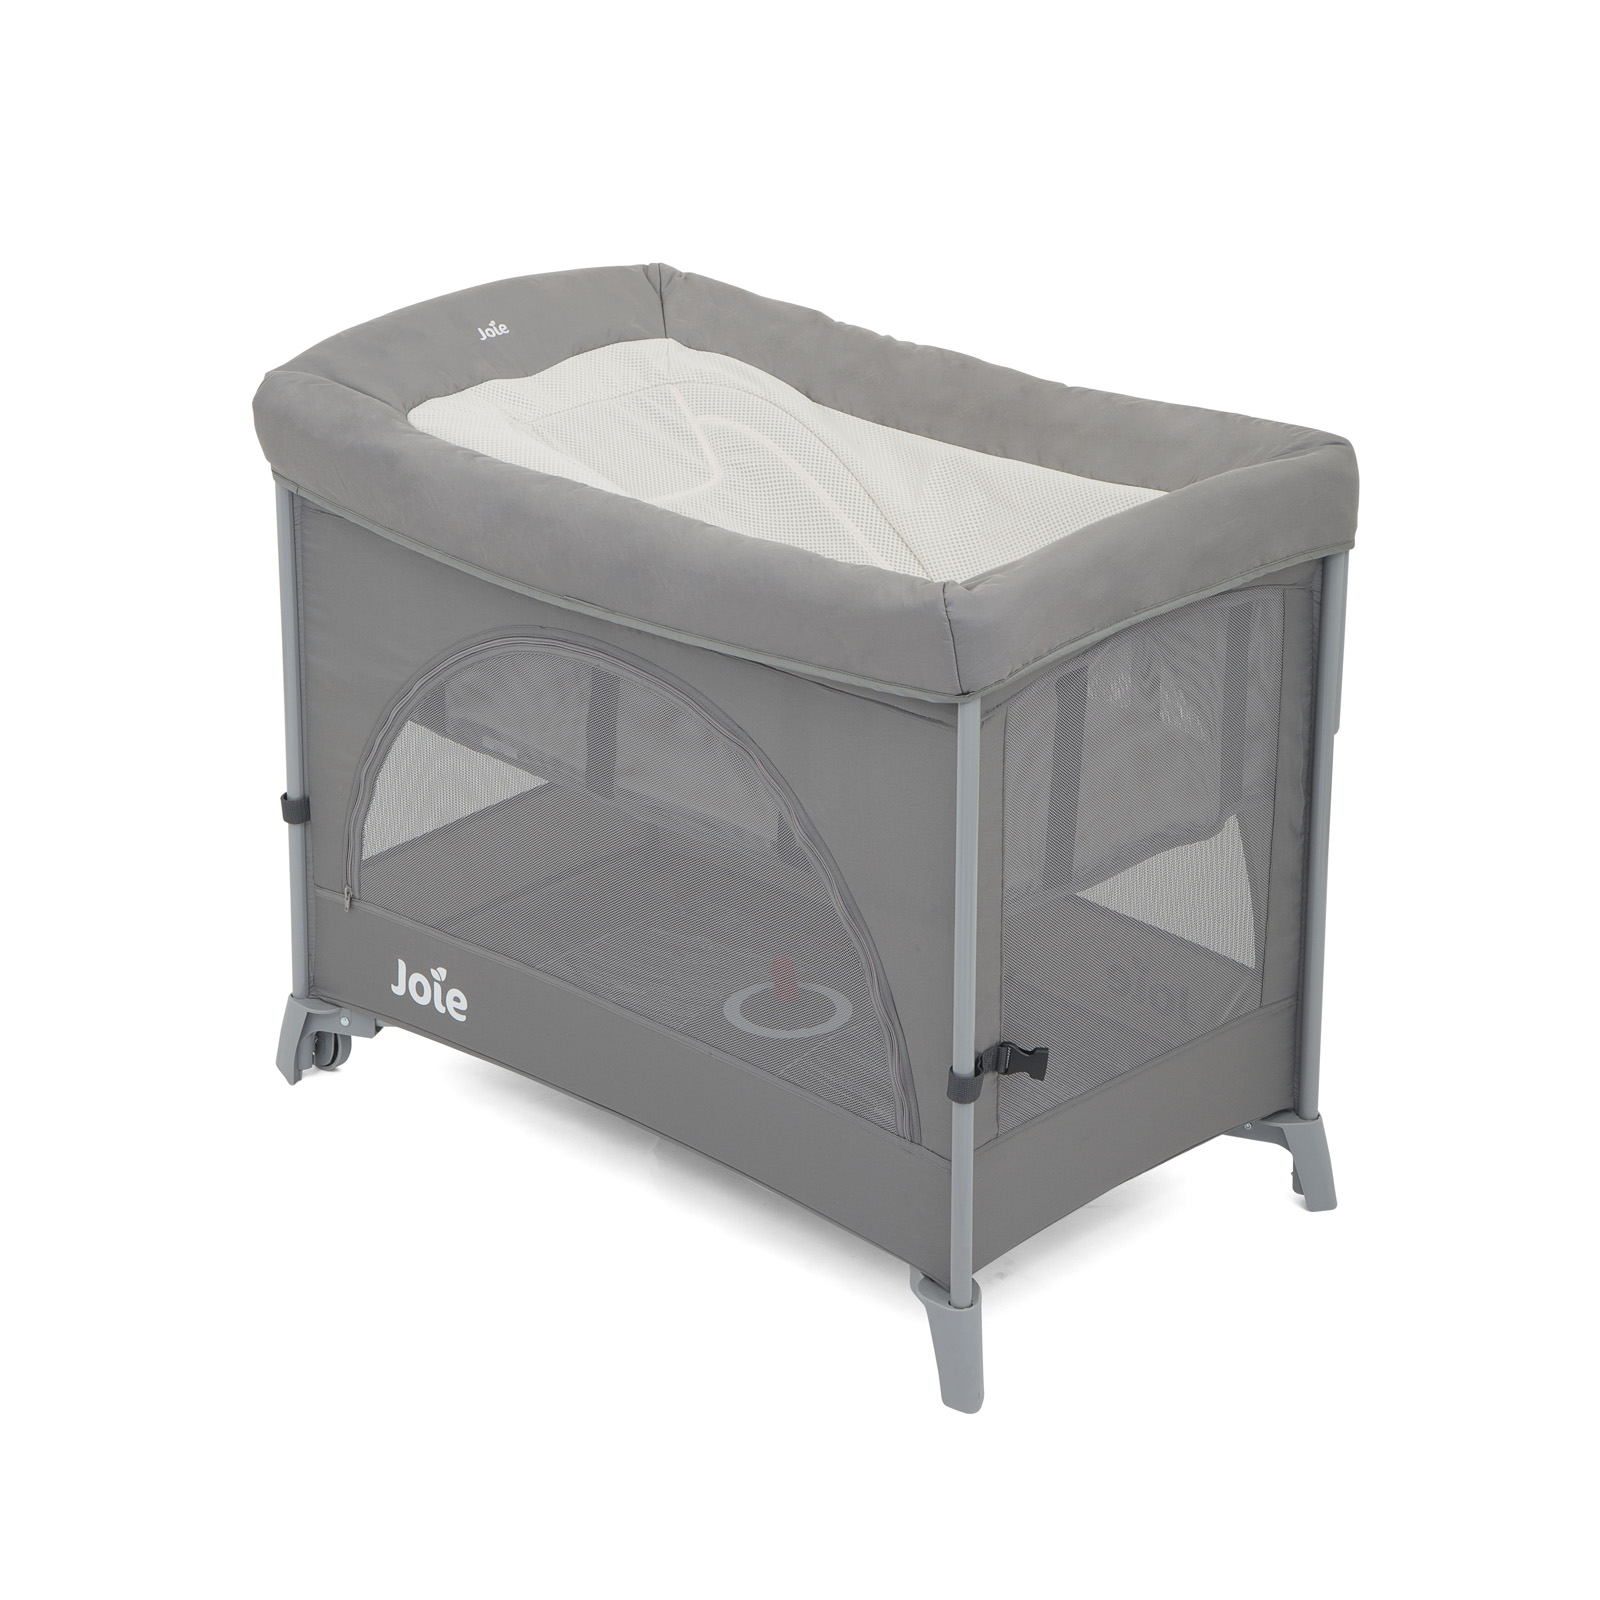 Joie Kubbie Sleep Bassinet Travel Cot with Daydreamer Accessory - Foggy Grey